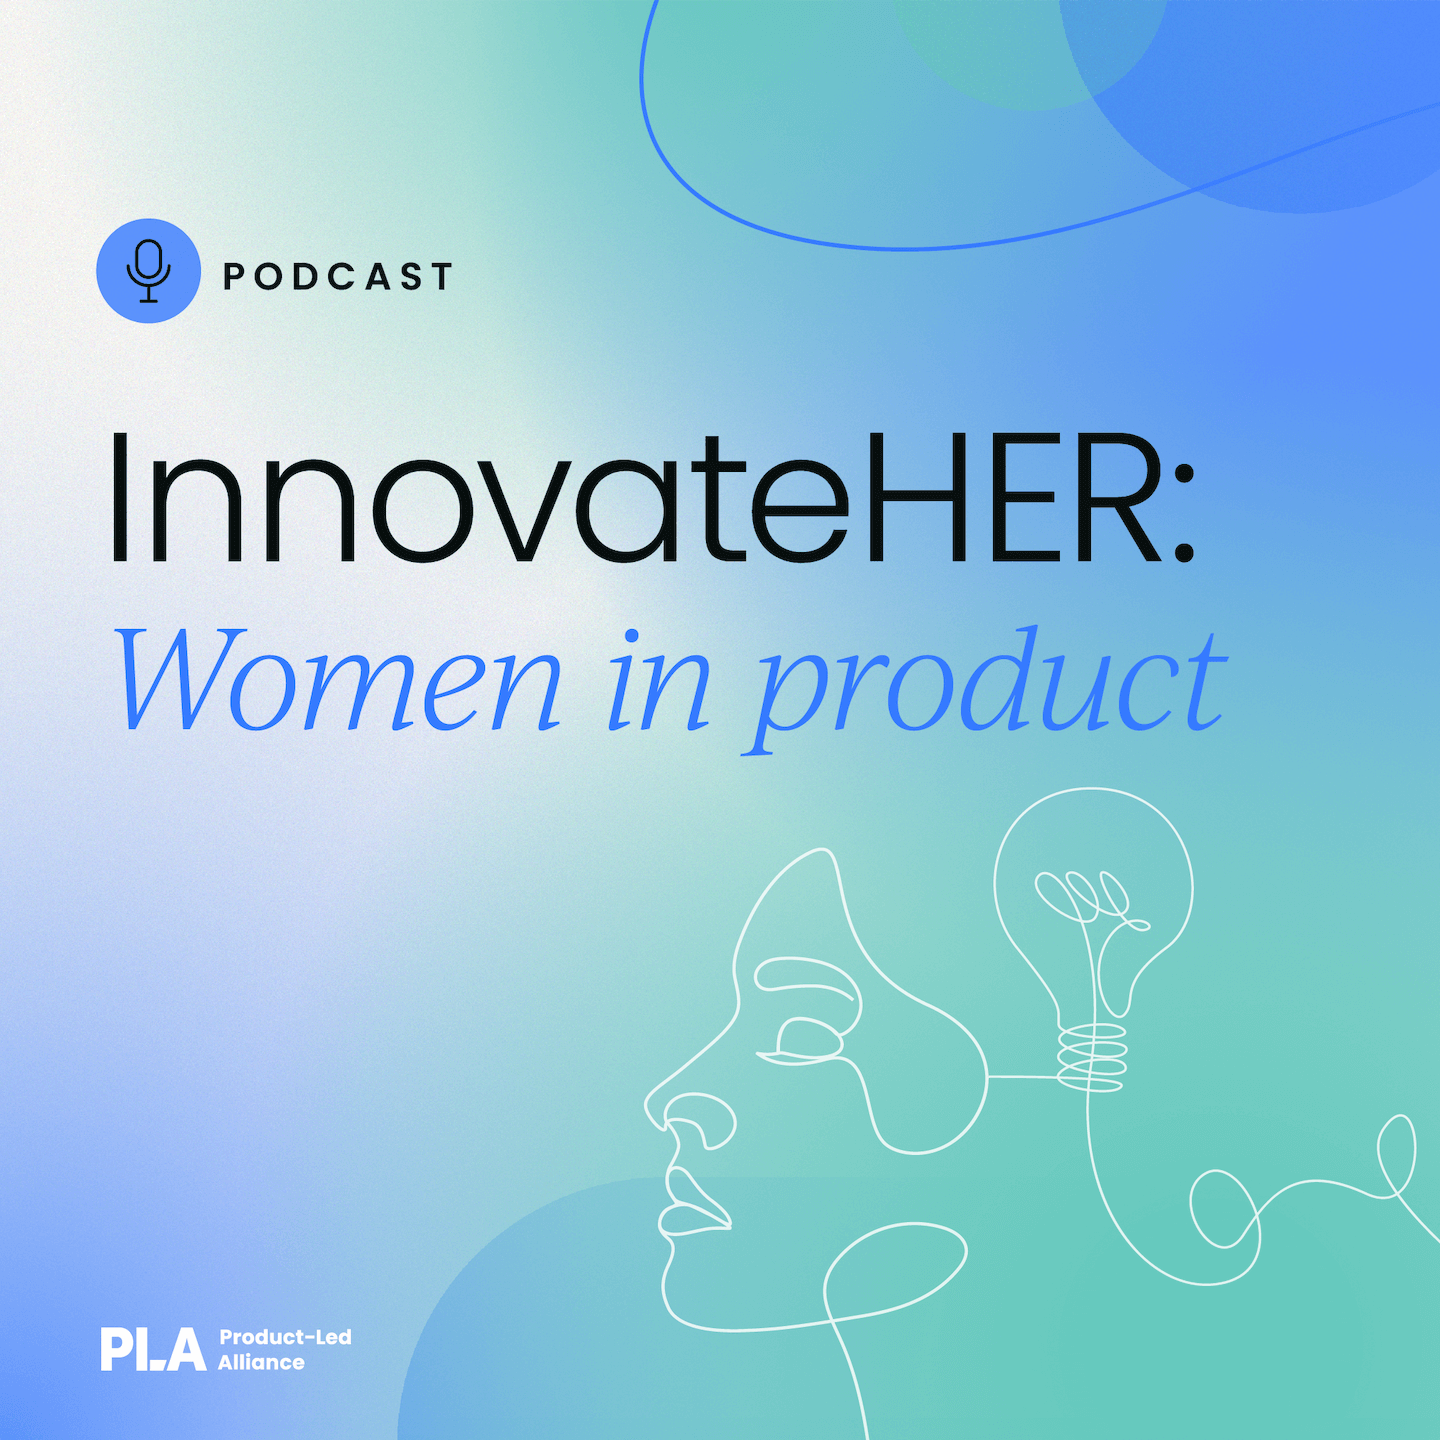 InnovateHER: Women in product